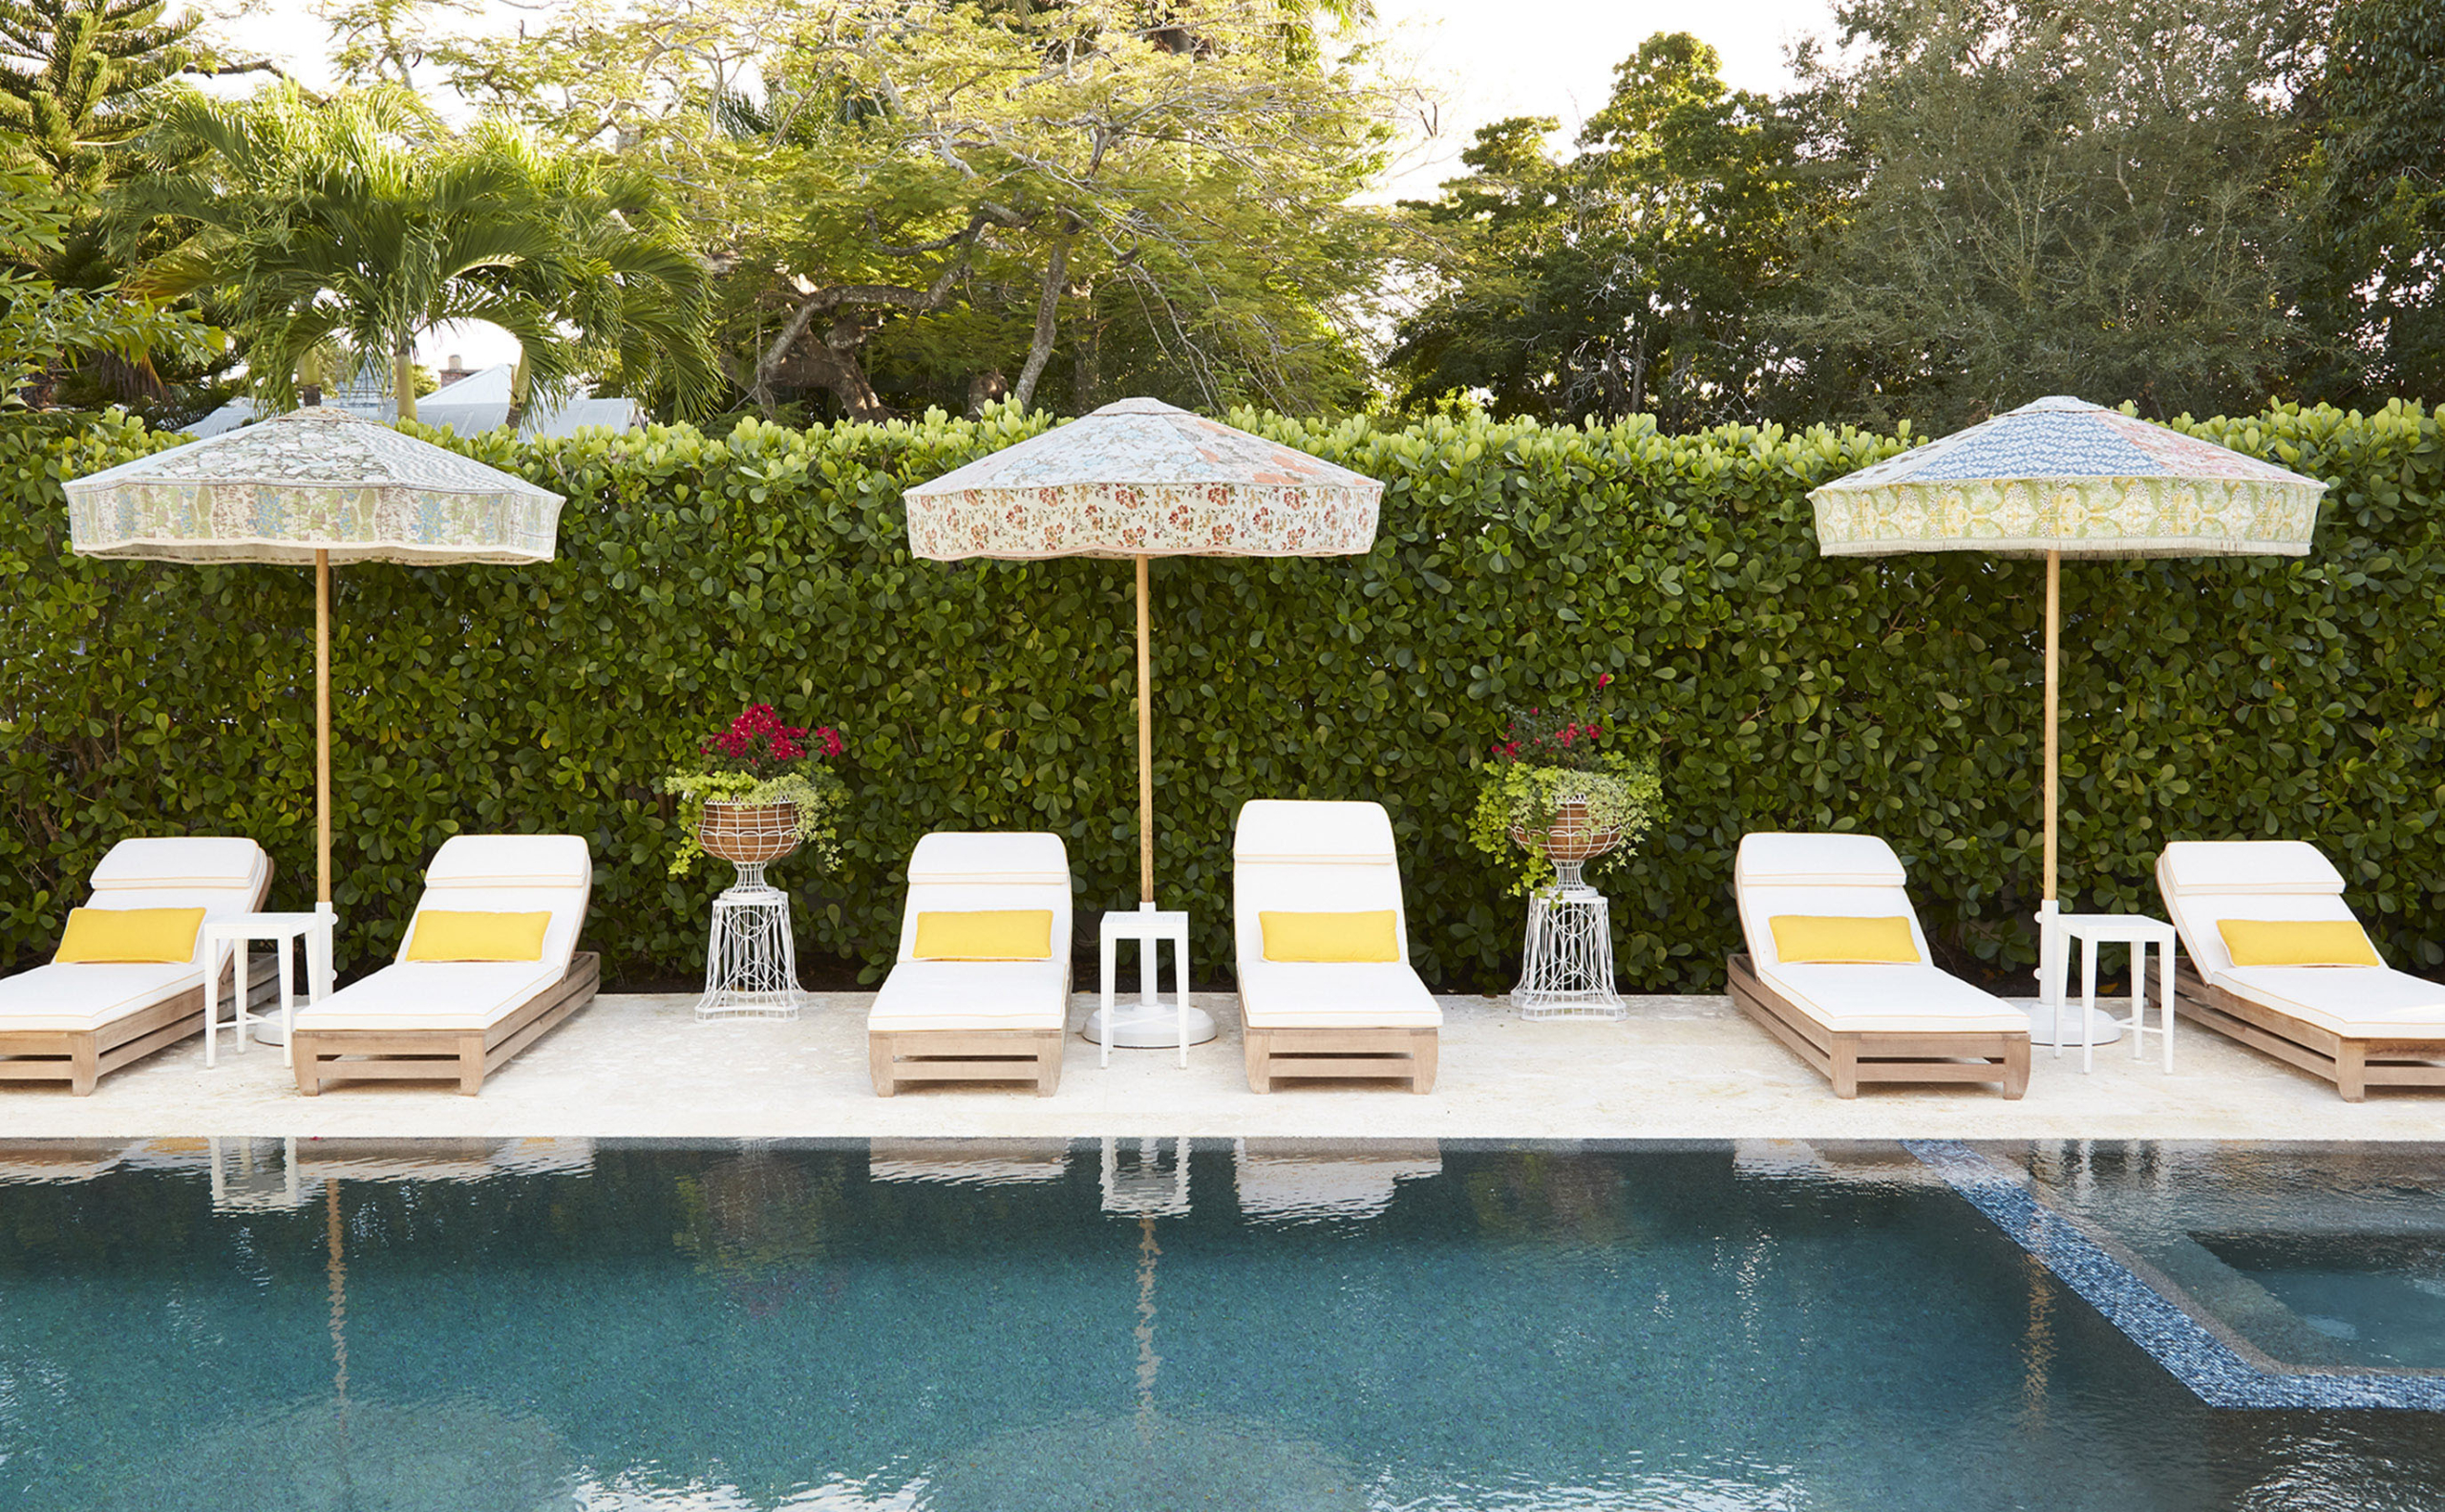 Playful umbrellas & a hedge wall surround a pool with interior design by Summer Thornton for a home in Naples Florida.